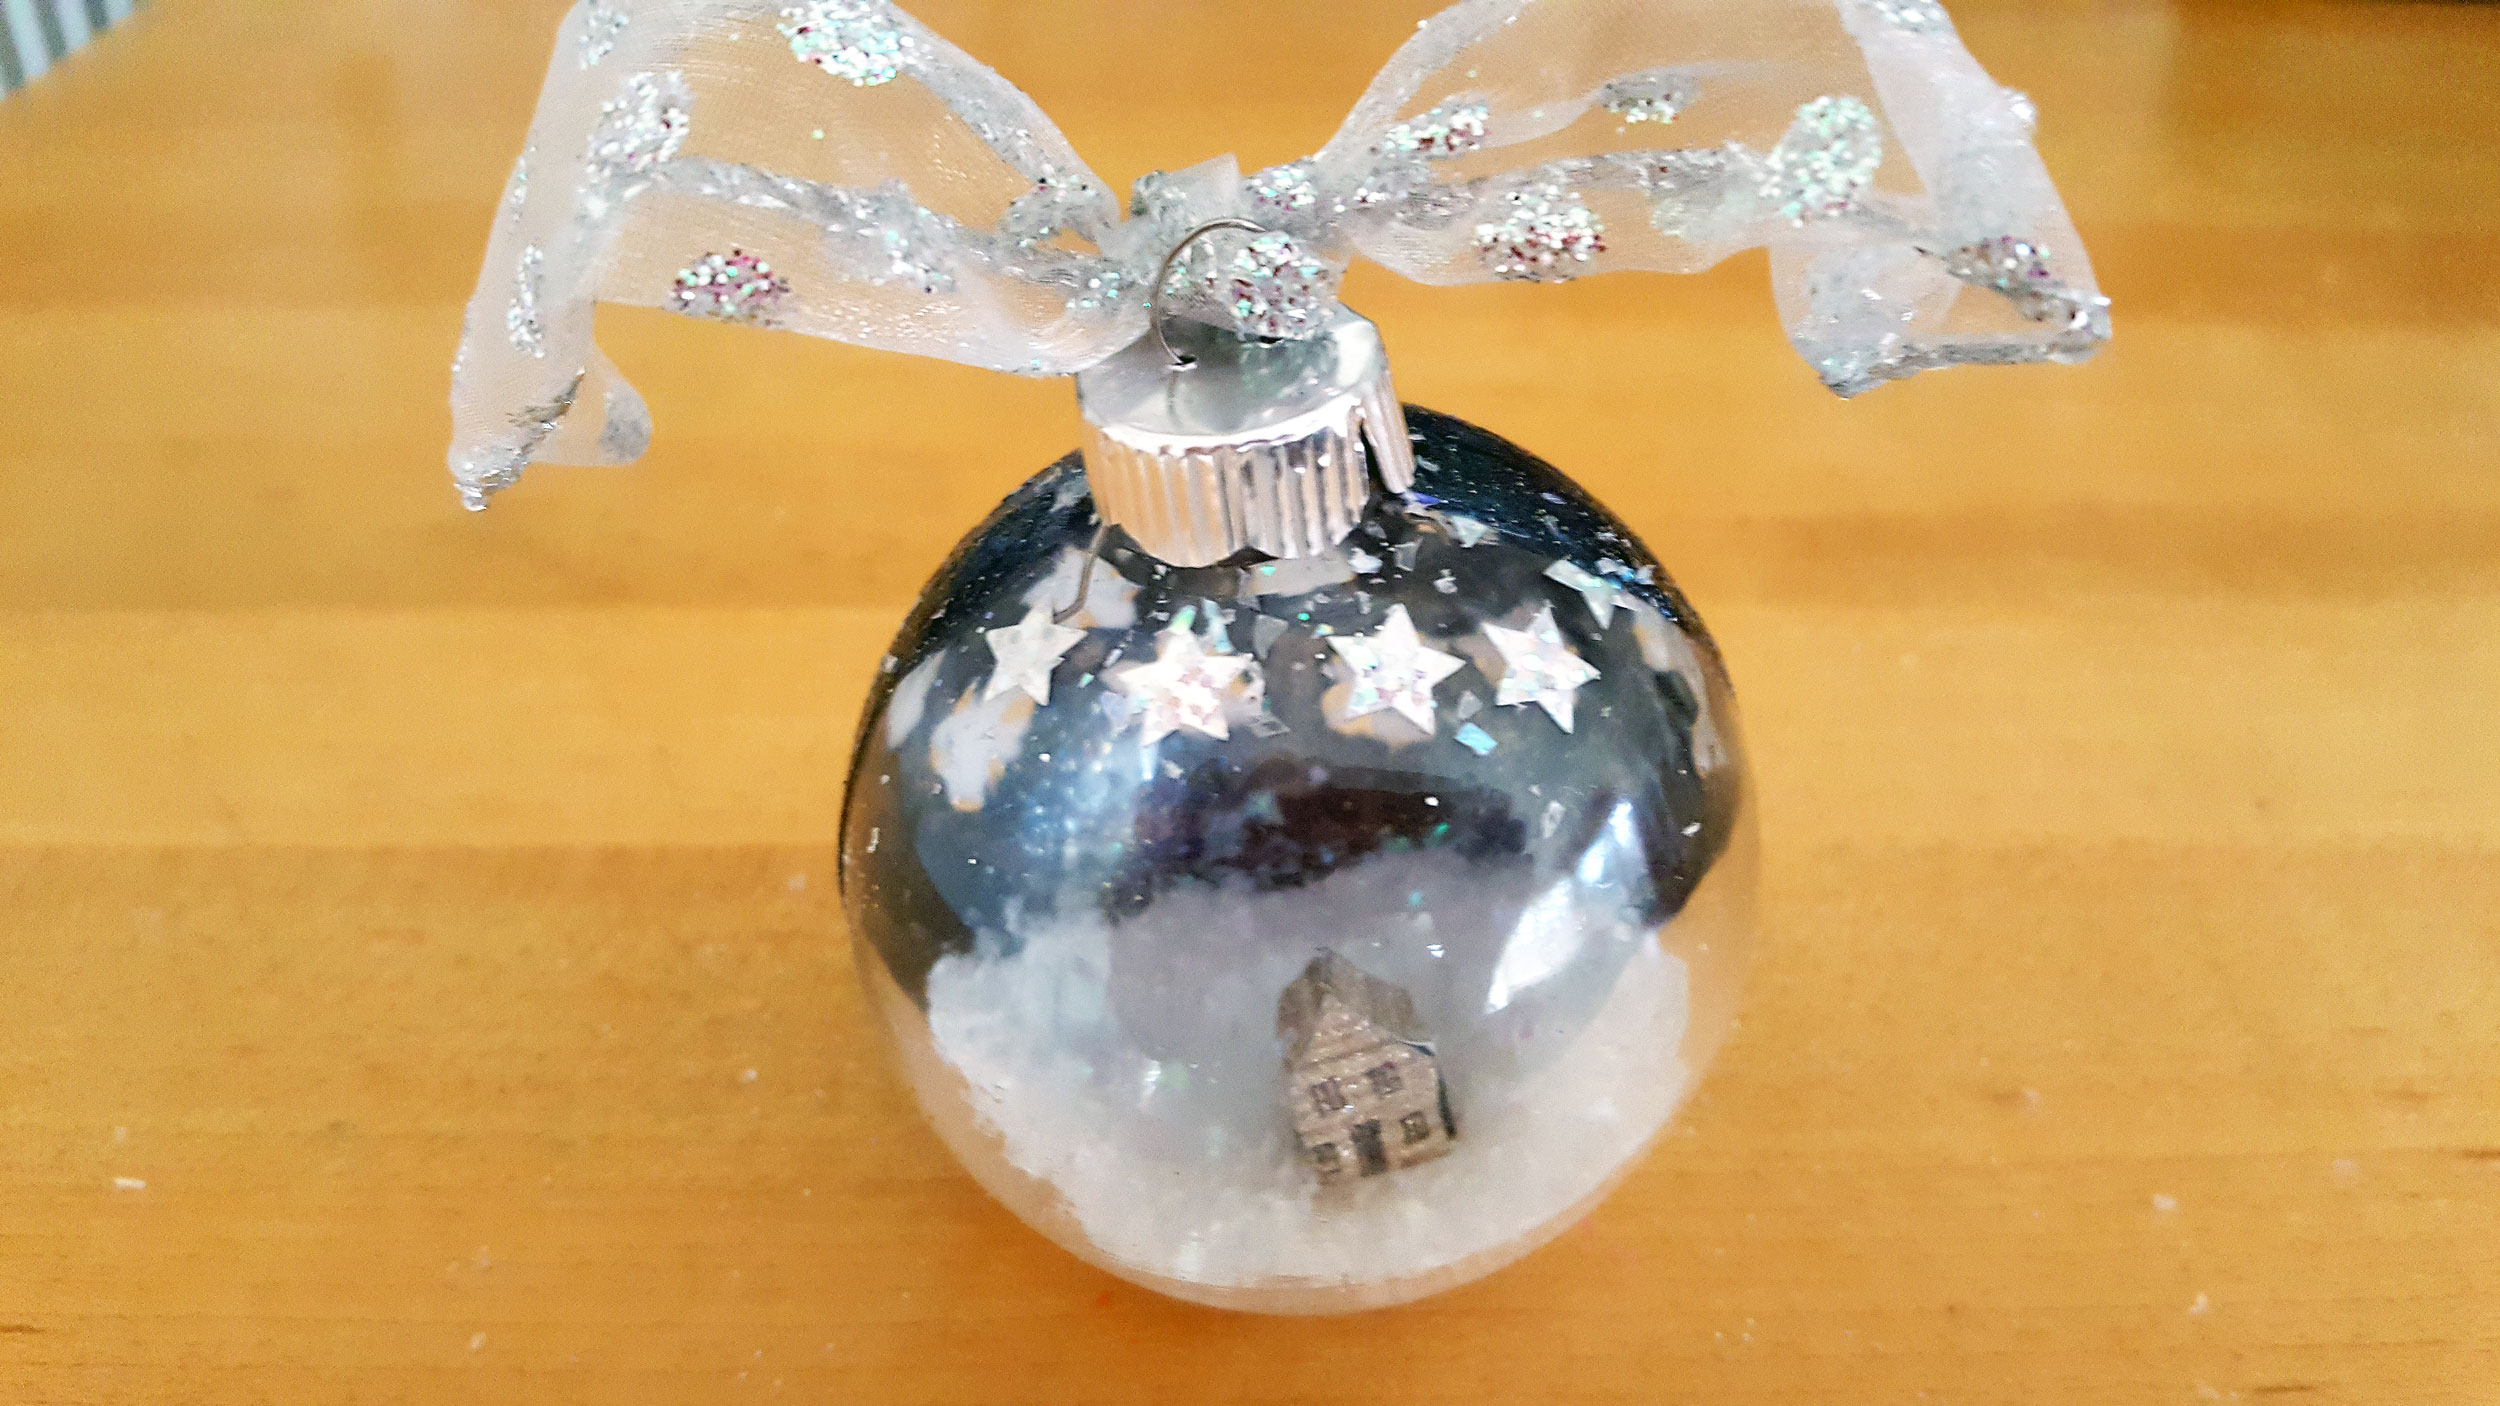 Silent Night Ornament Completed Project. | OrnamentShop.com